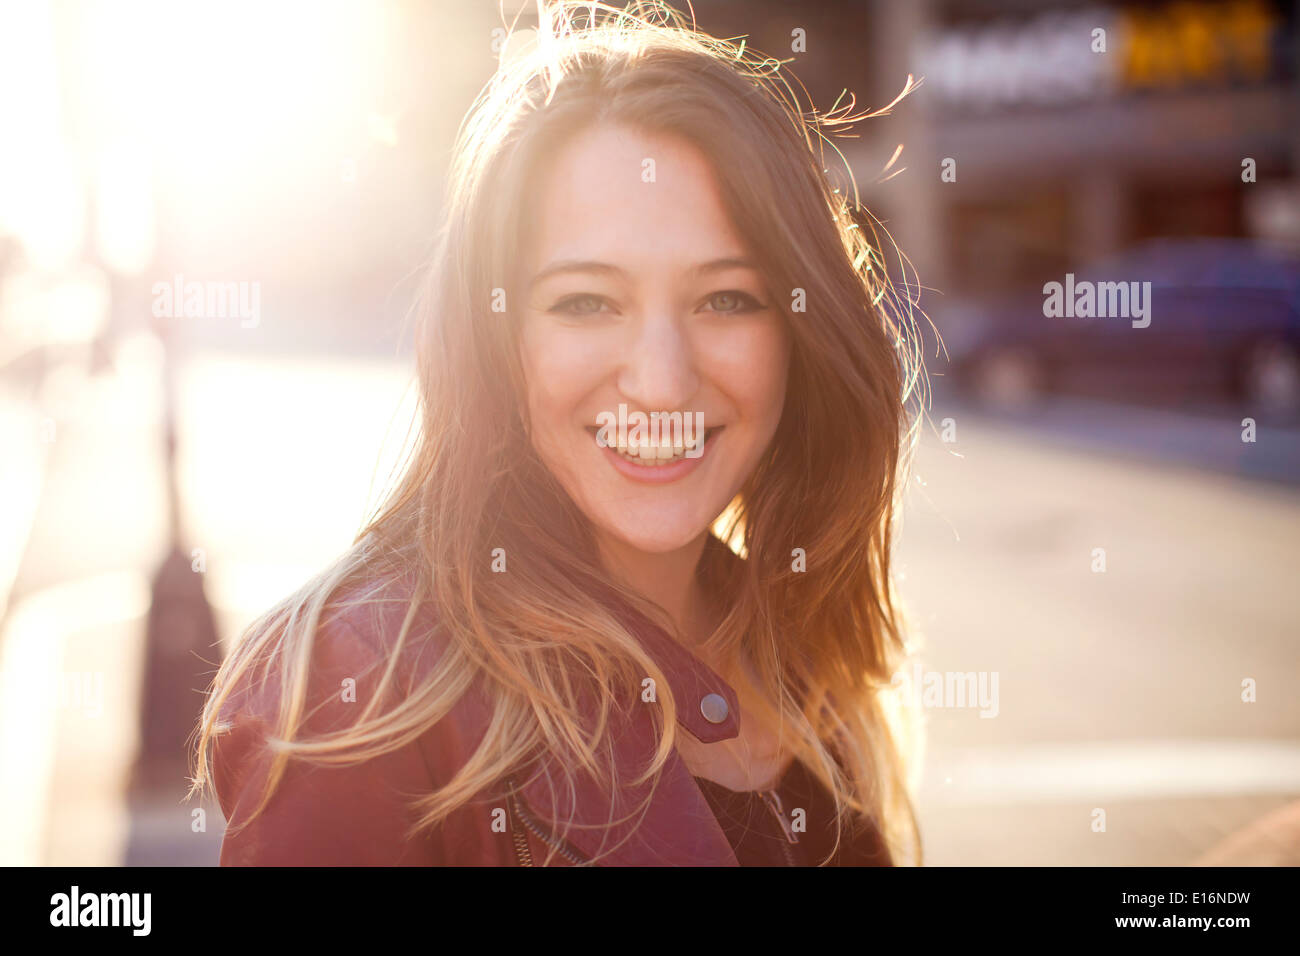 Young adult woman smiling, Boston, Massachusetts, USA Banque D'Images